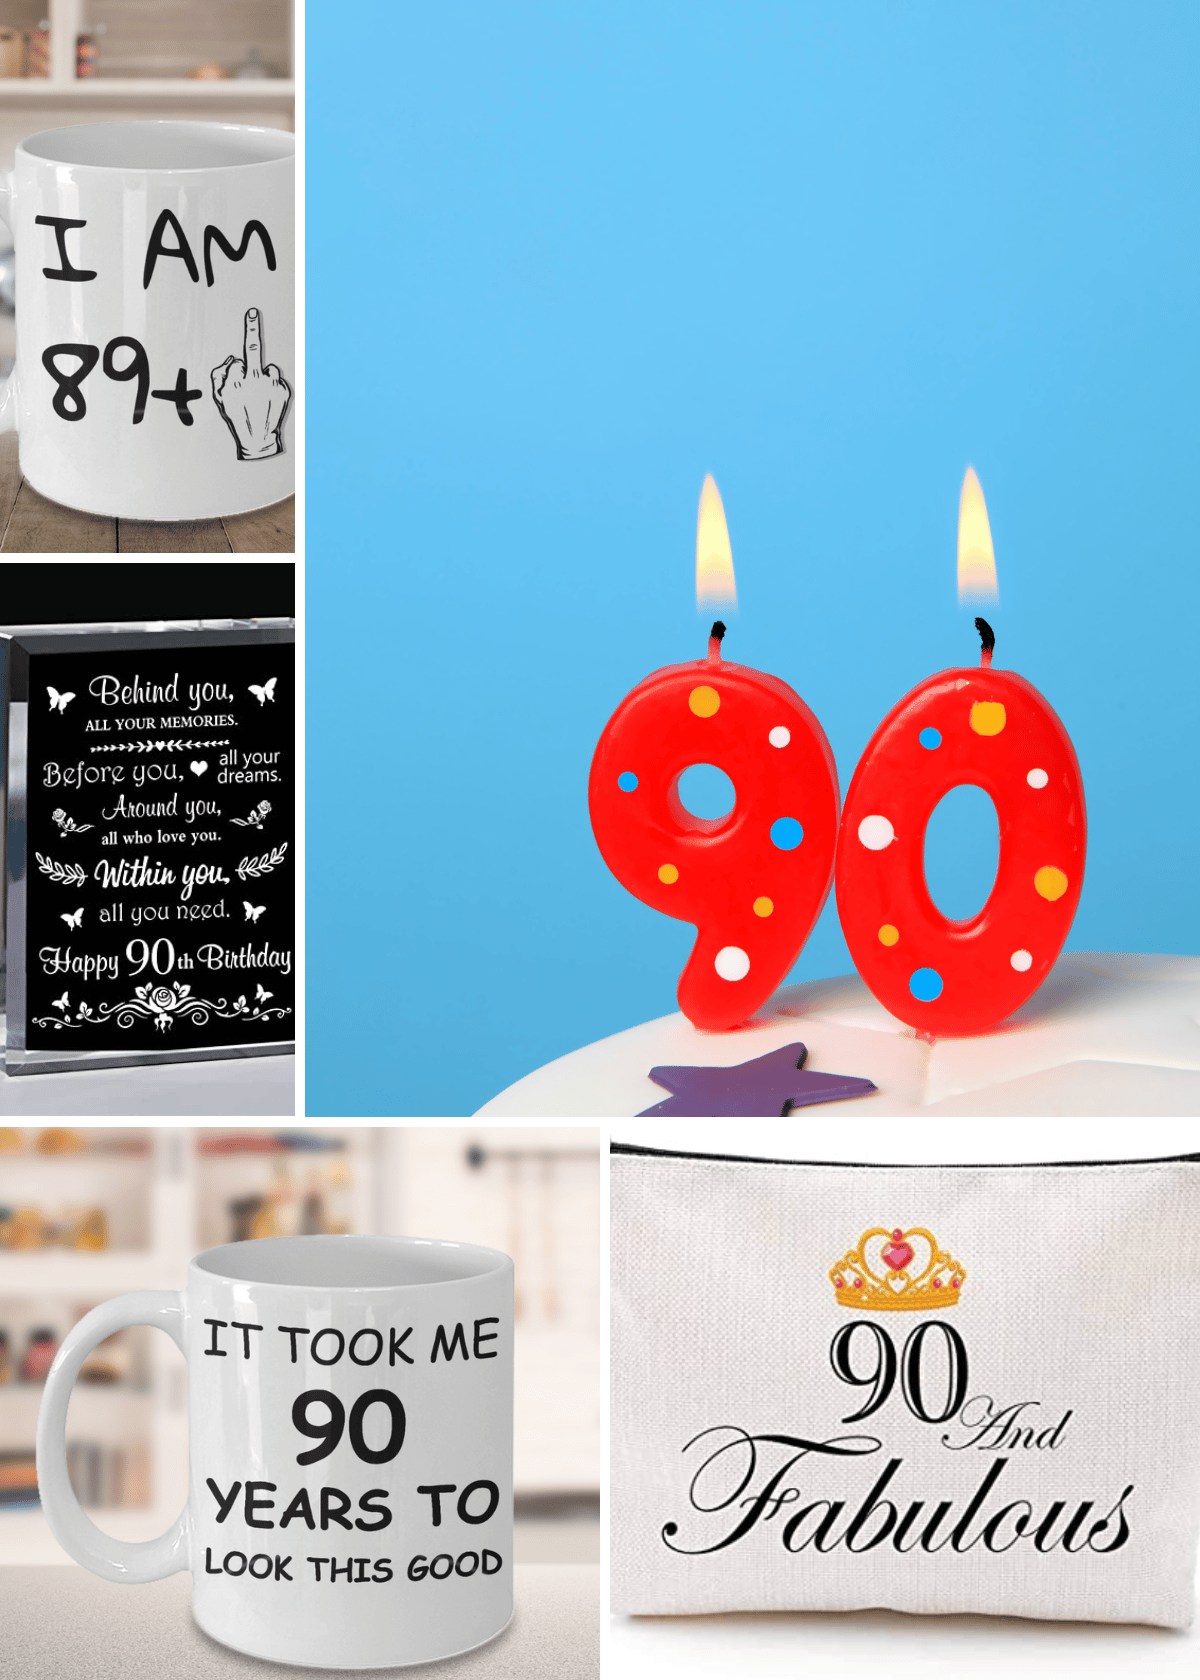 90th Birthday Gift Ideas: The Best Gifts on Amazon for Your Loved One